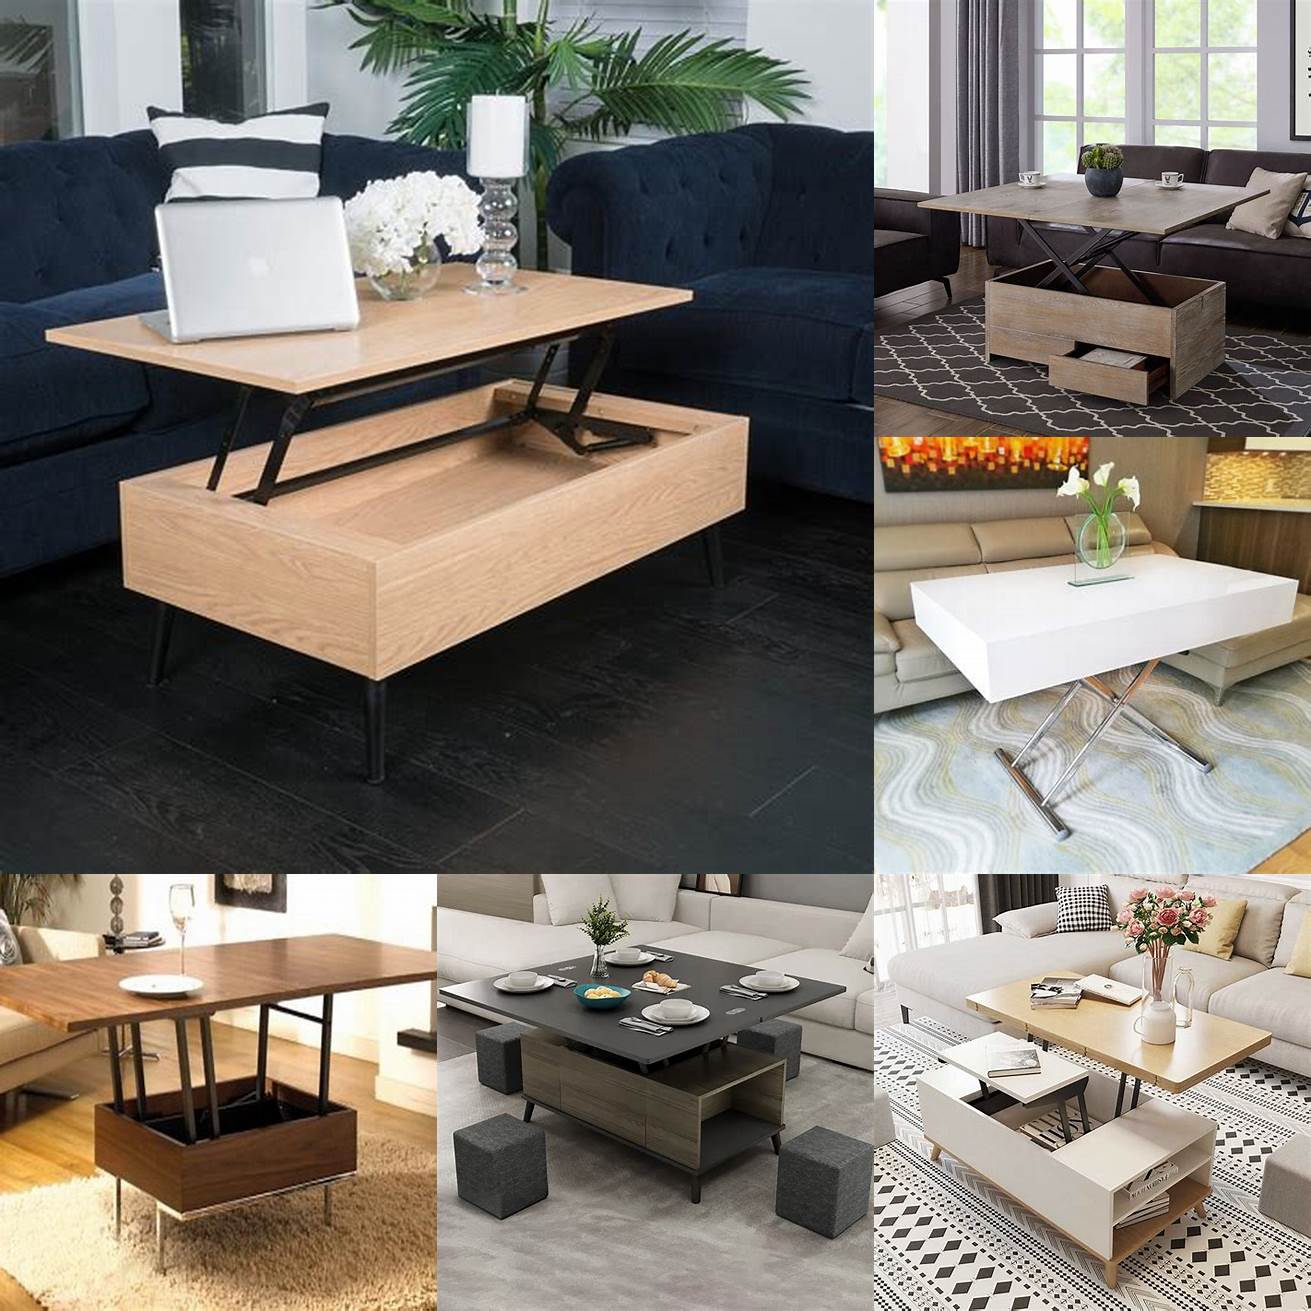 A convertible dining table can be transformed into a coffee table or a work desk It is ideal for small spaces that need to serve multiple purposes